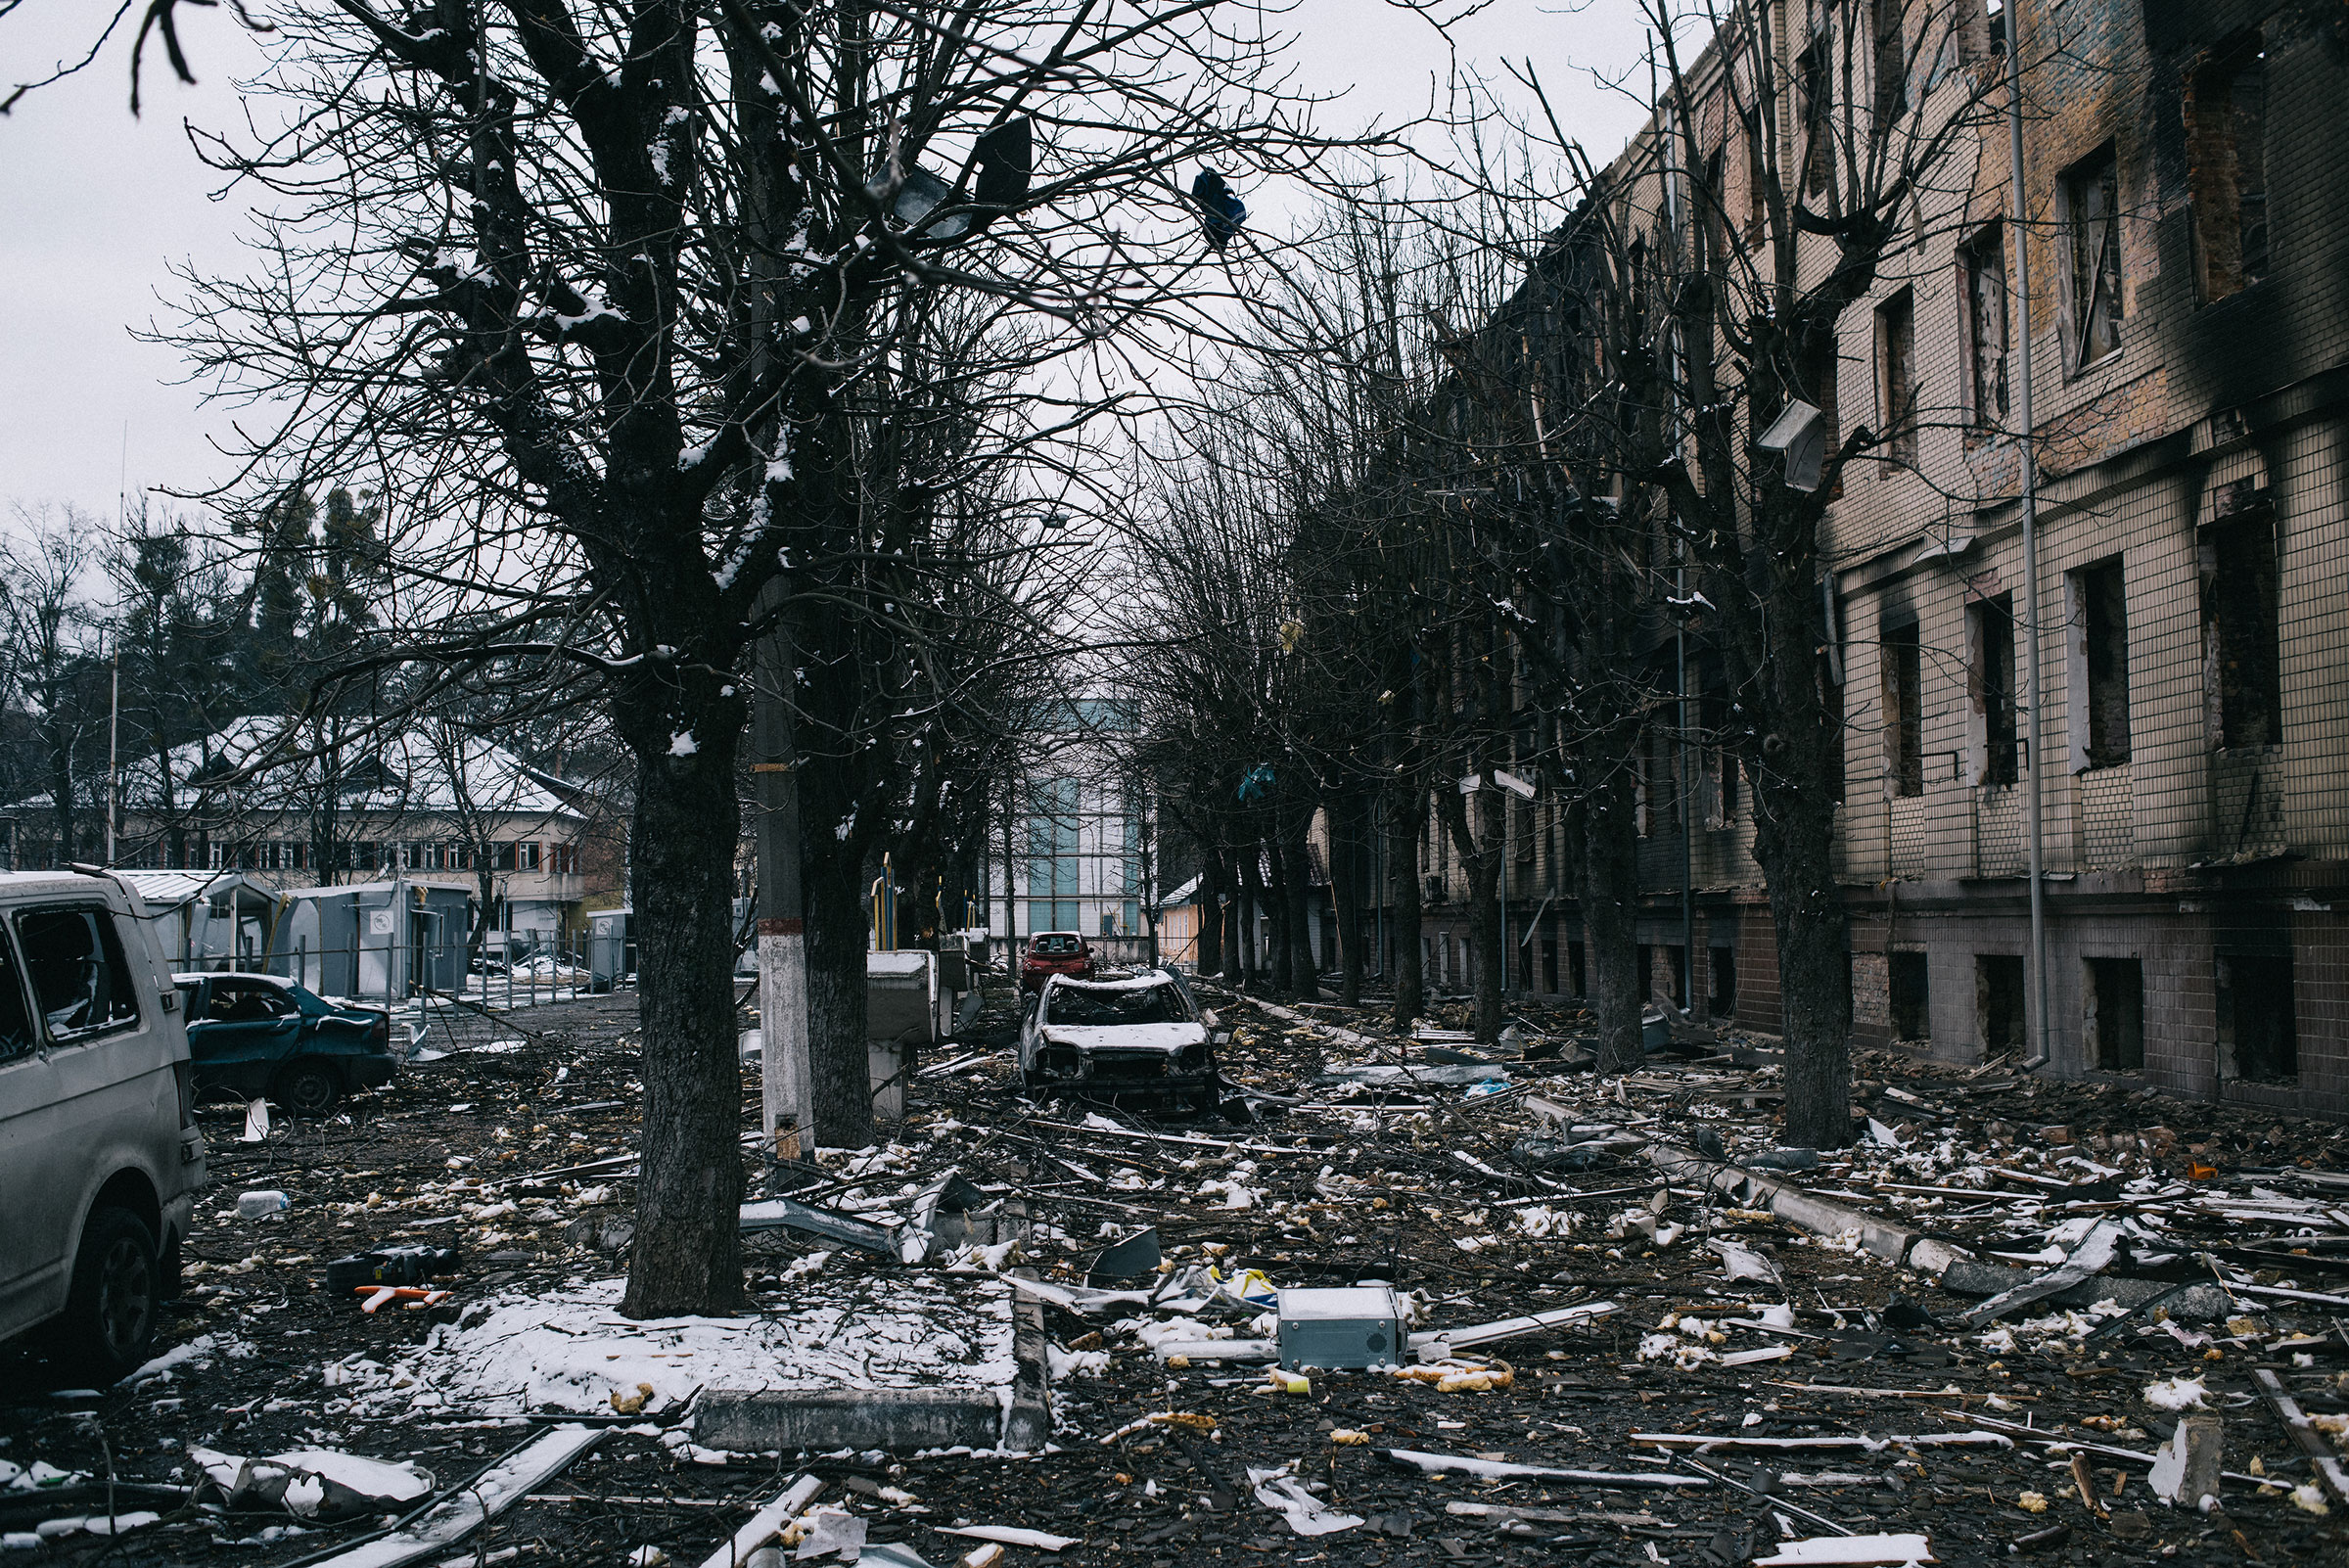 Debris litters the streets of Brovary, days after a deadly Russian rocket attack on Ukrainian military units left vehicles and buildings gutted and destroyed